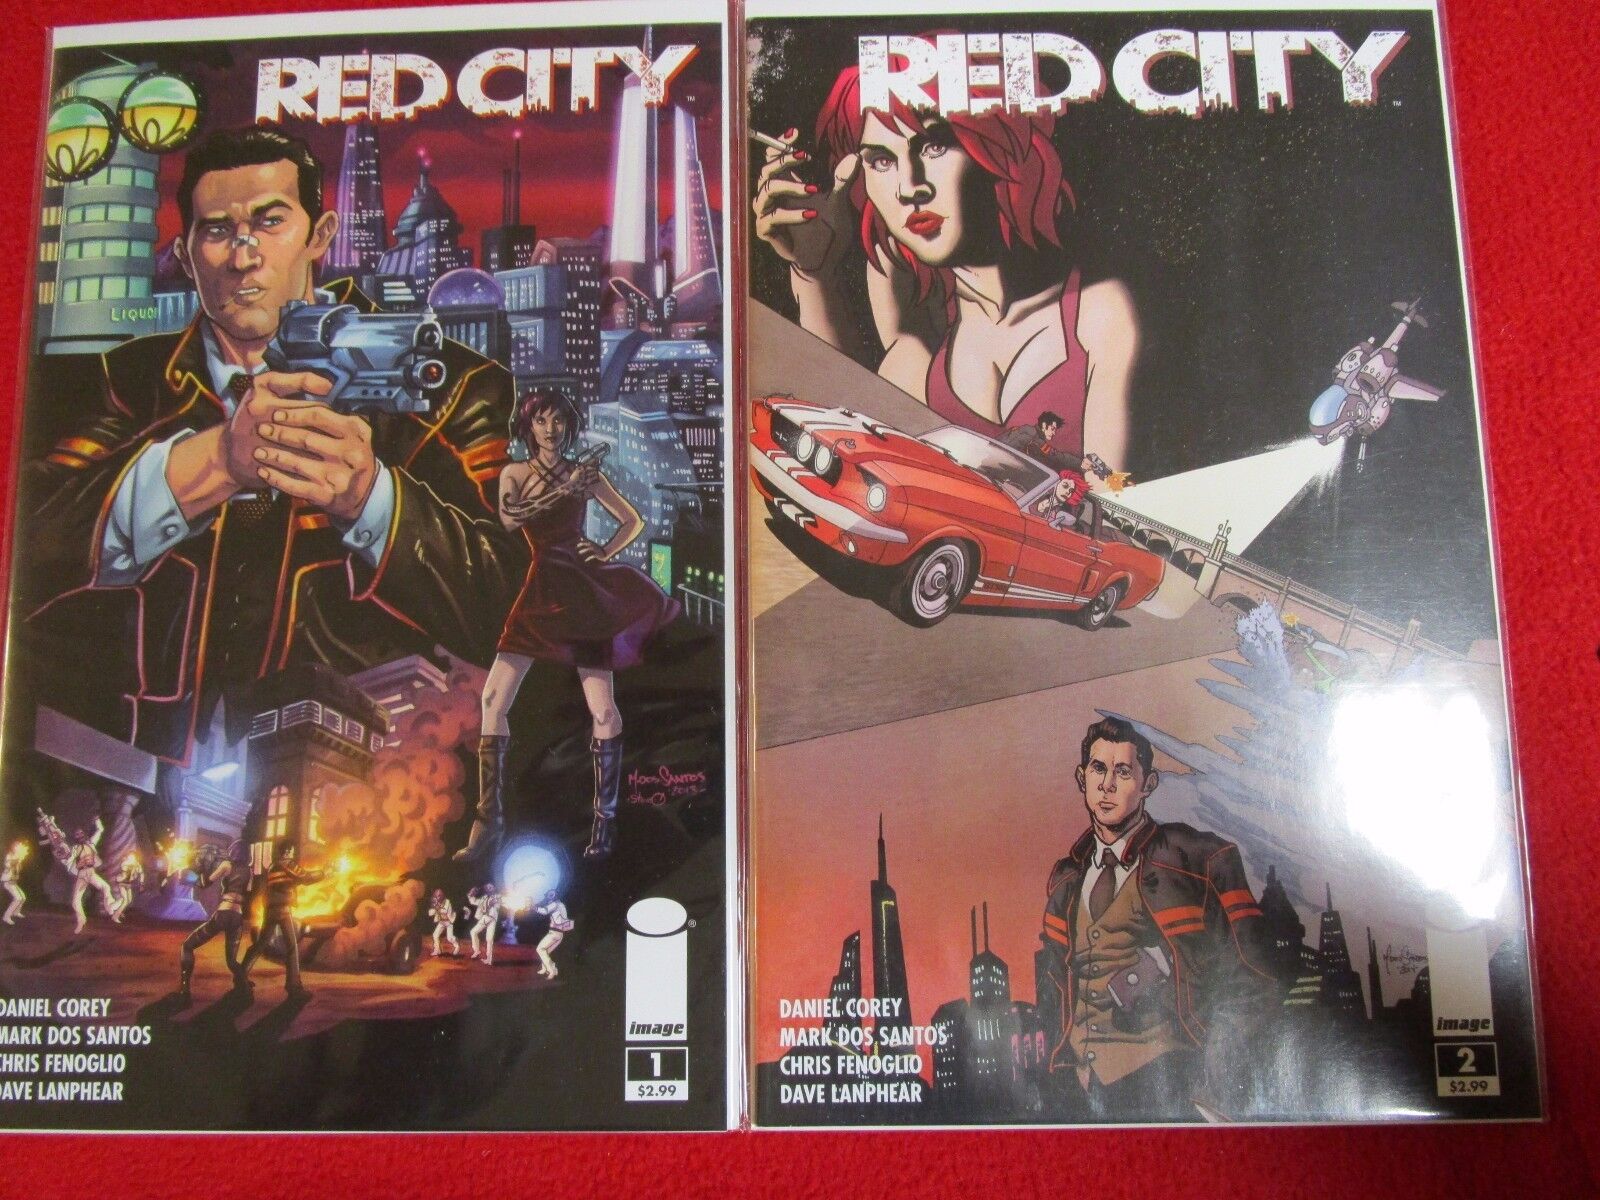 RED CITY by Image Comics #1 & #2 collectible comics comic books